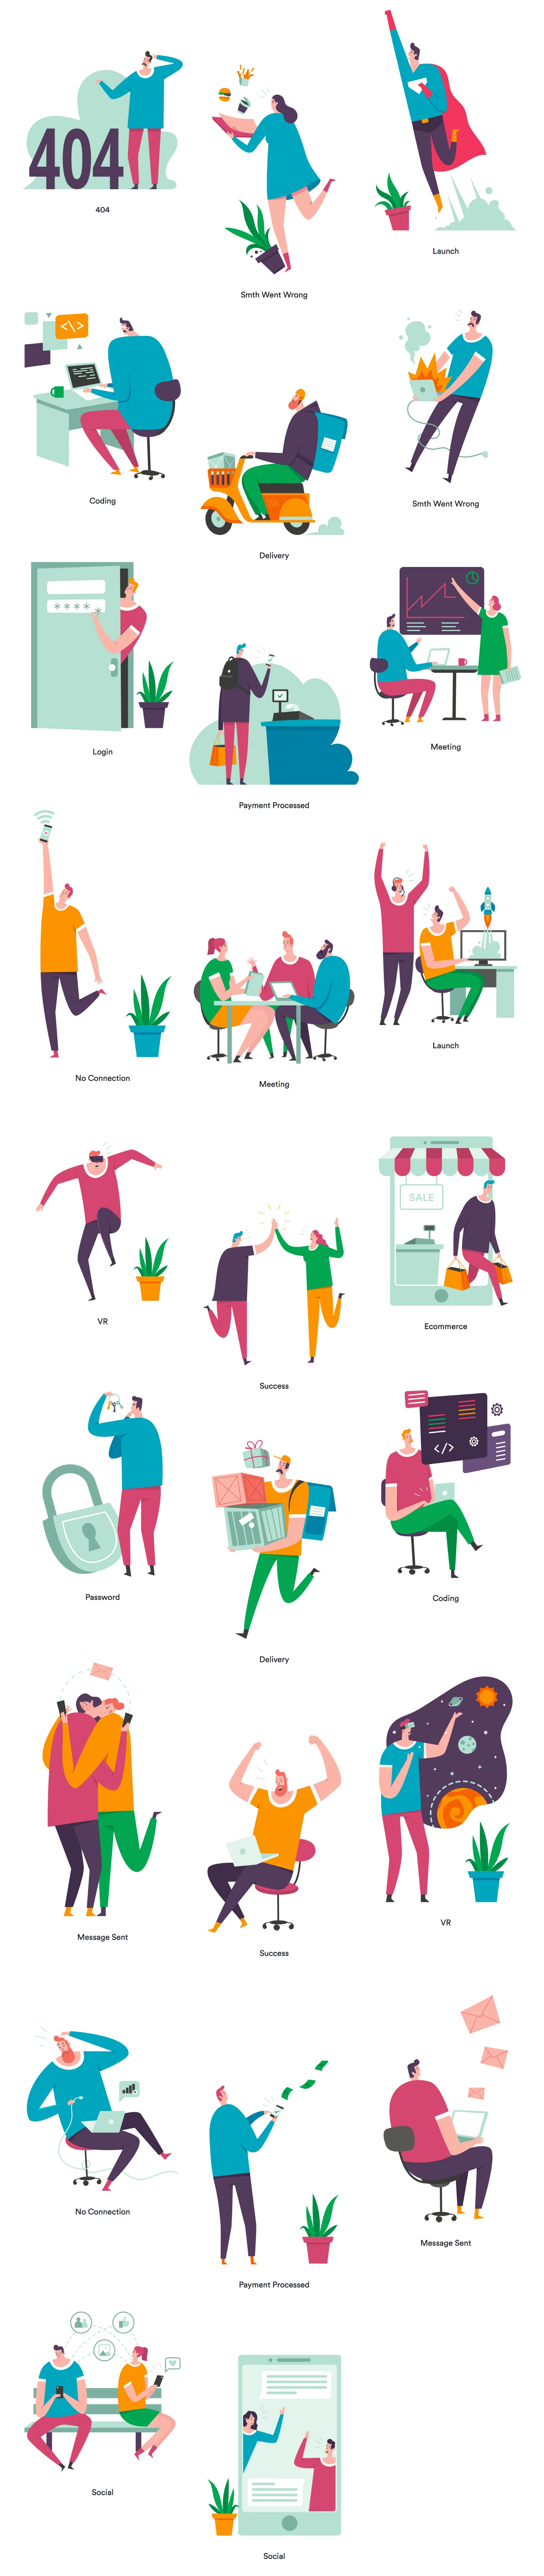 Whoosh! - Funny illustrations - Use this pack of illustrations for any kind of projects from websites to applications